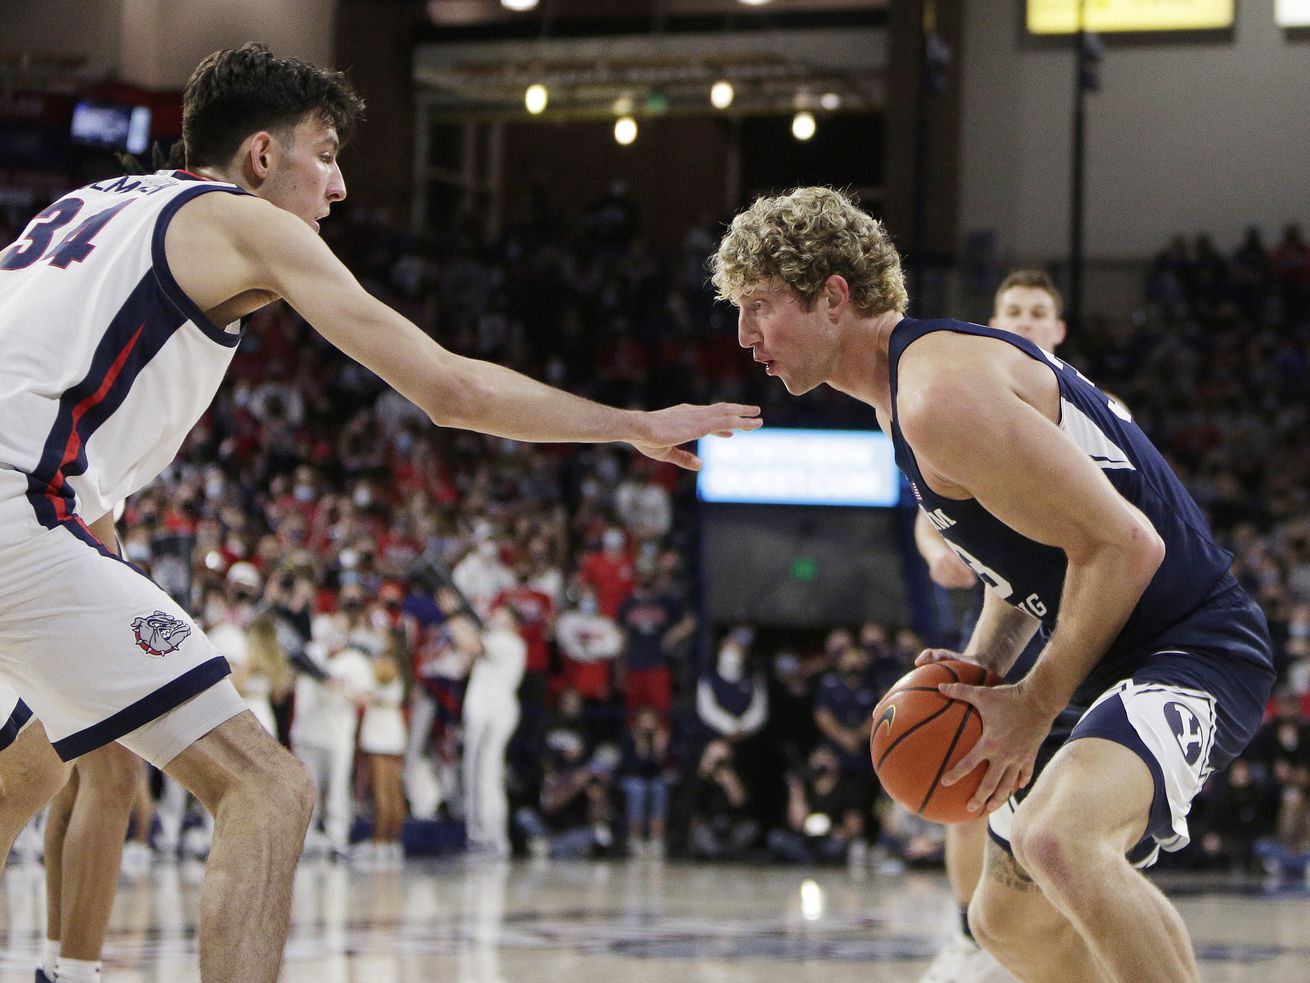 BYU forward Caleb Lohner, right, controls the ball while defended by Gonzaga center Chet Holmgren in Spokane, Wash.